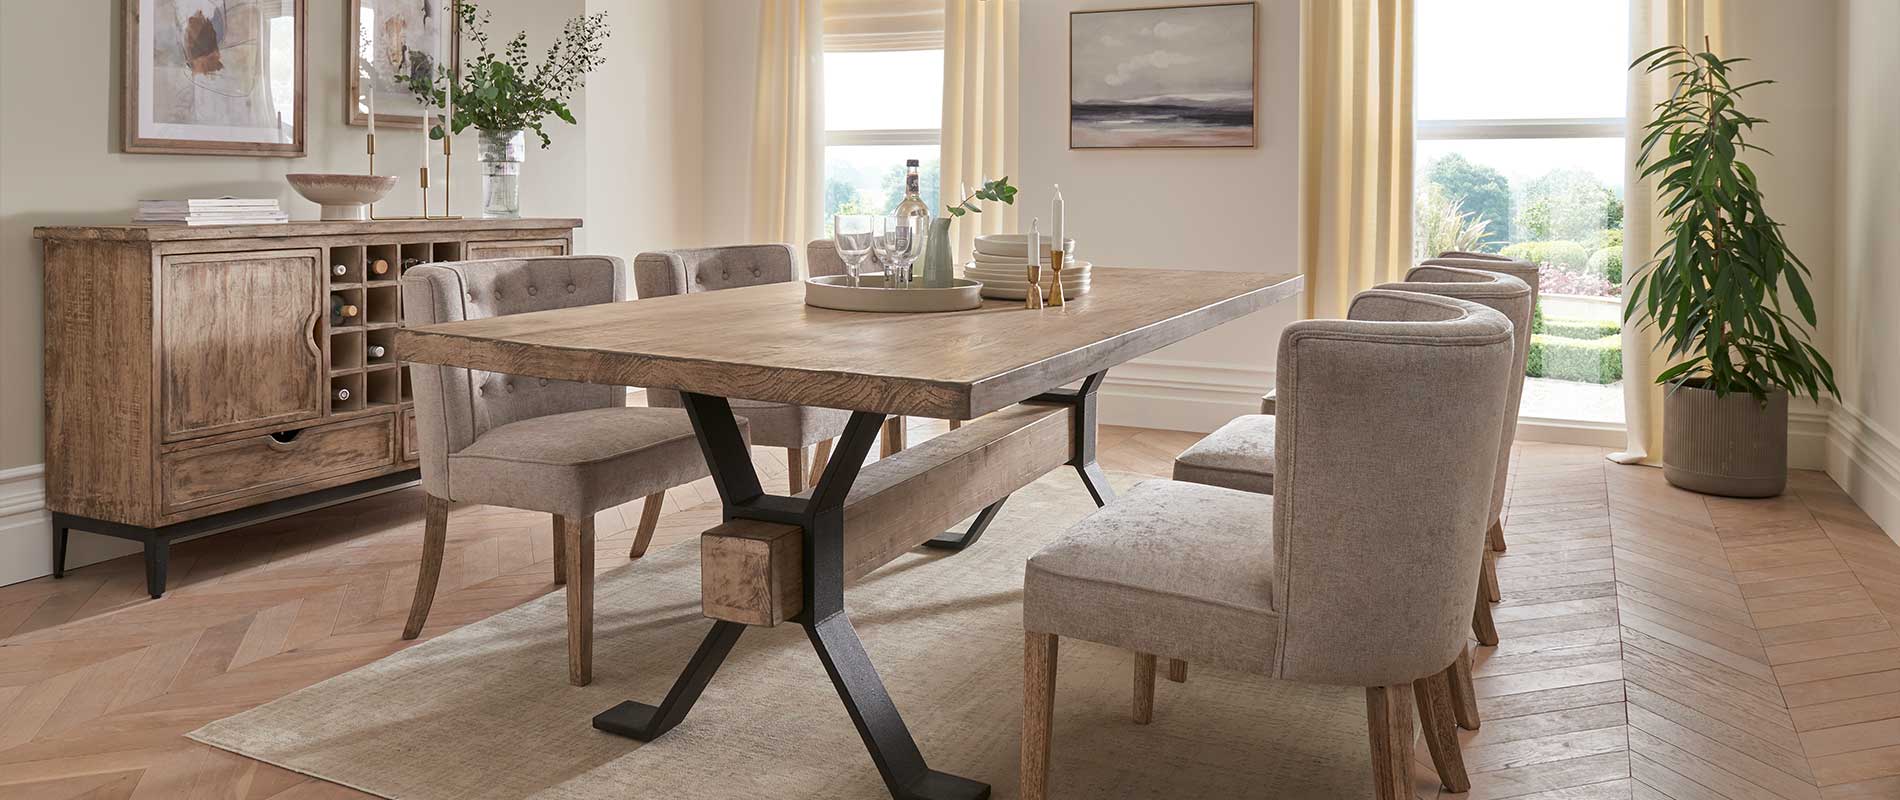 rustic wood dining table and chairs